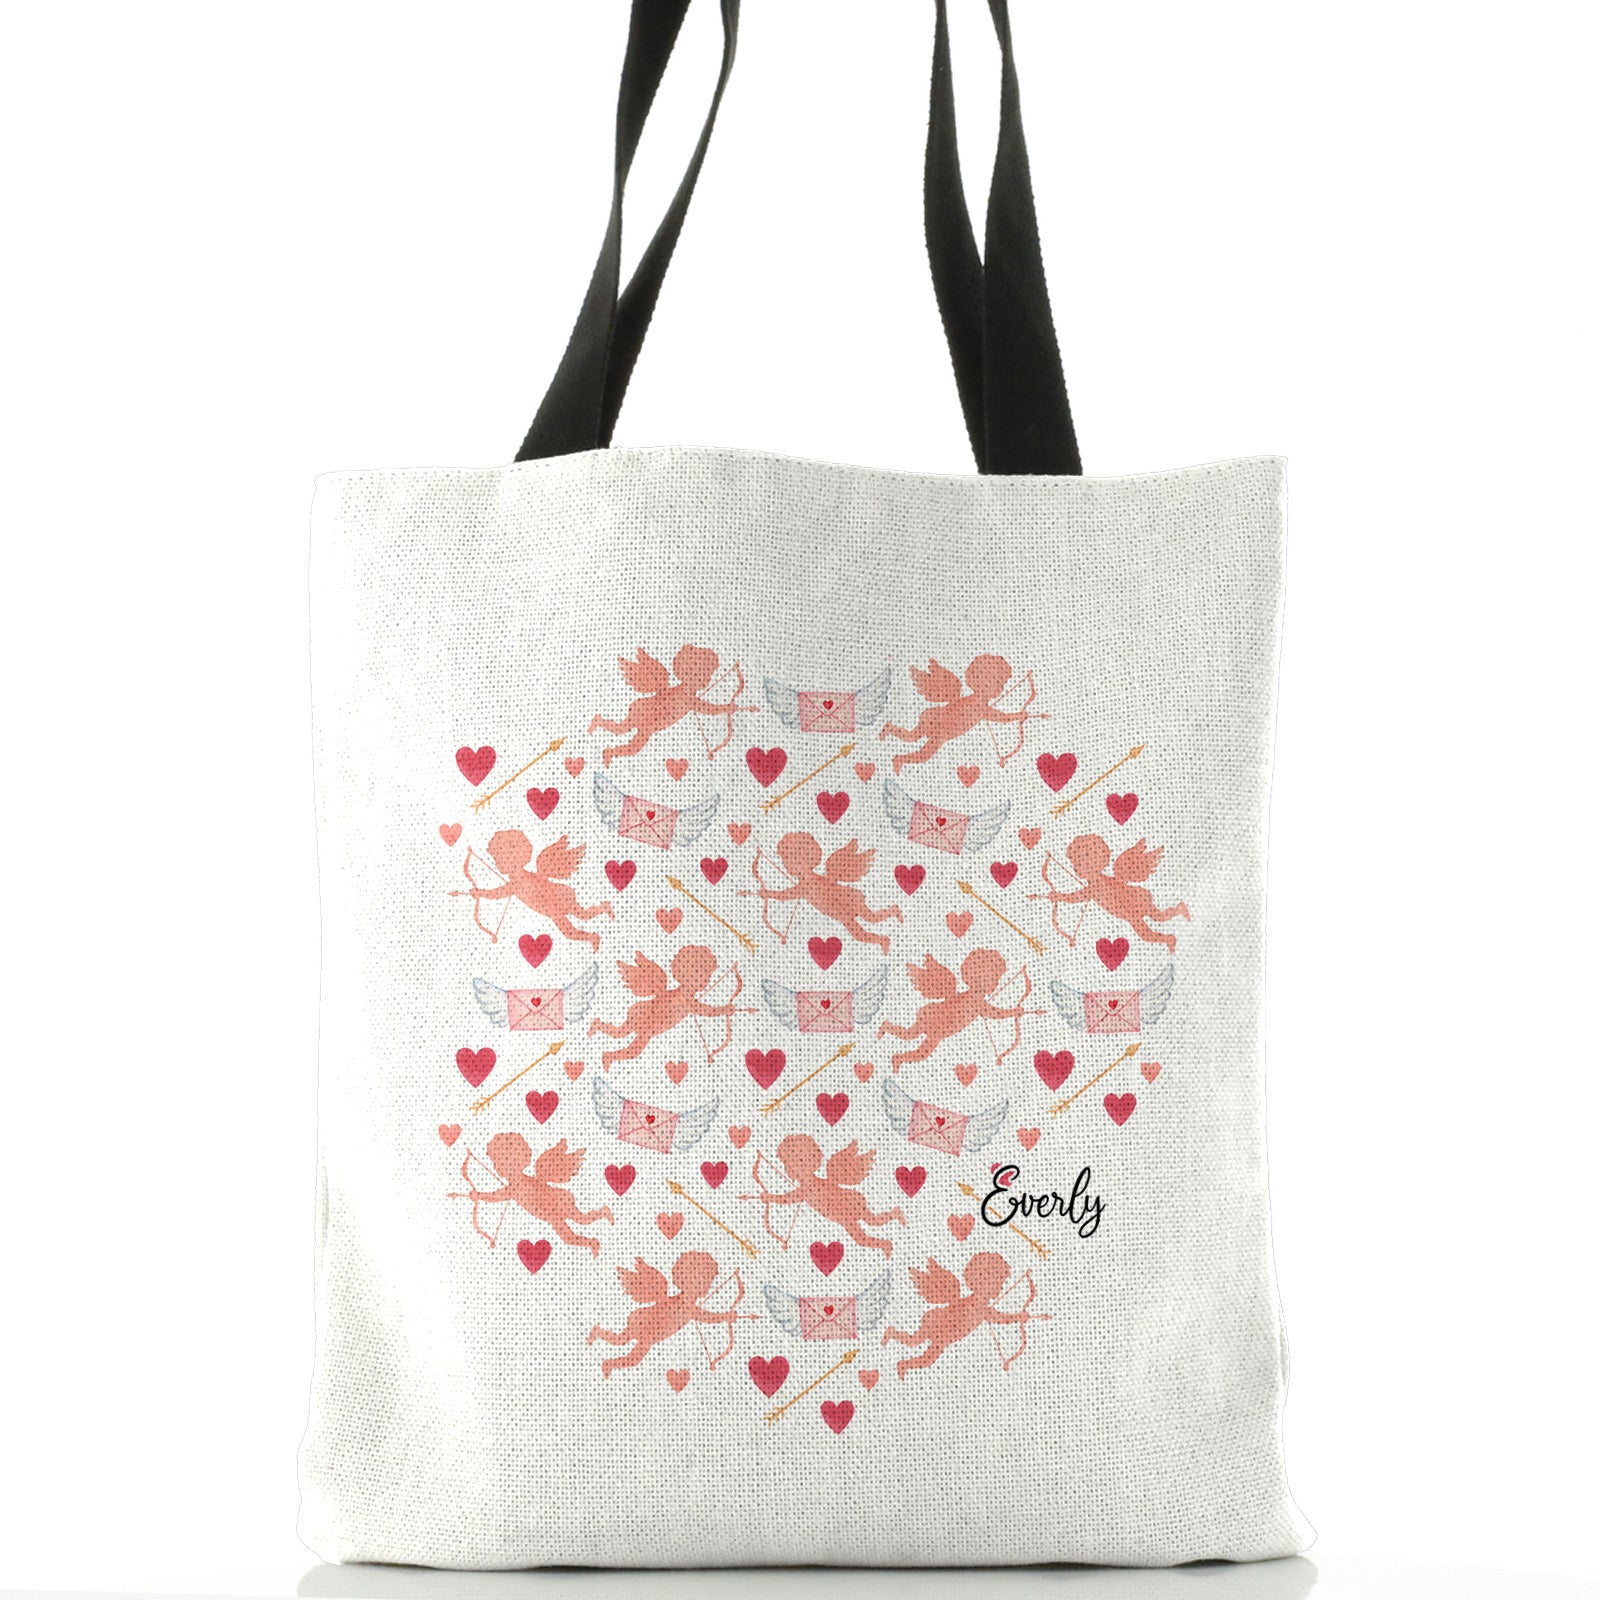 Personalised White Tote Bag with Stylish Text and Cupid Hearts Print